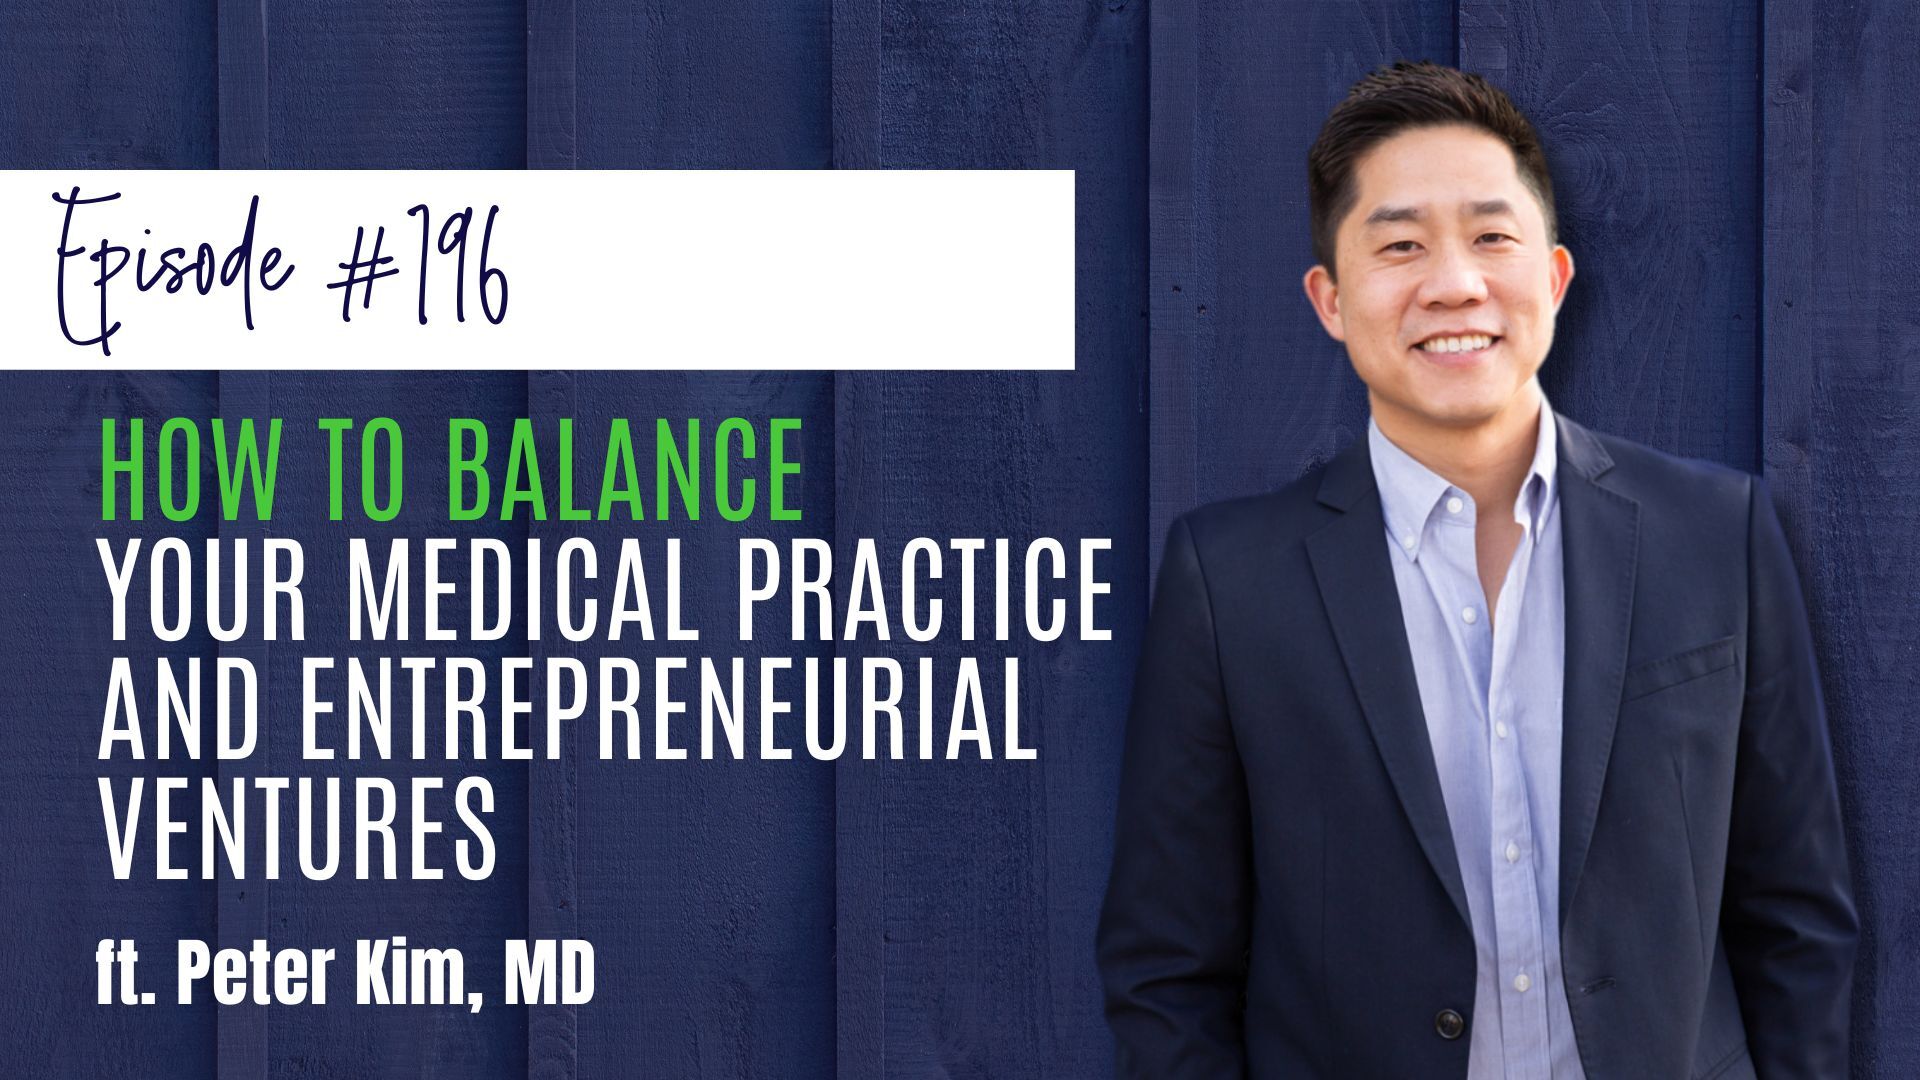 #196 How to Balance Your Medical Practice and Entrepreneurial Ventures, ft. Dr. Peter Kim